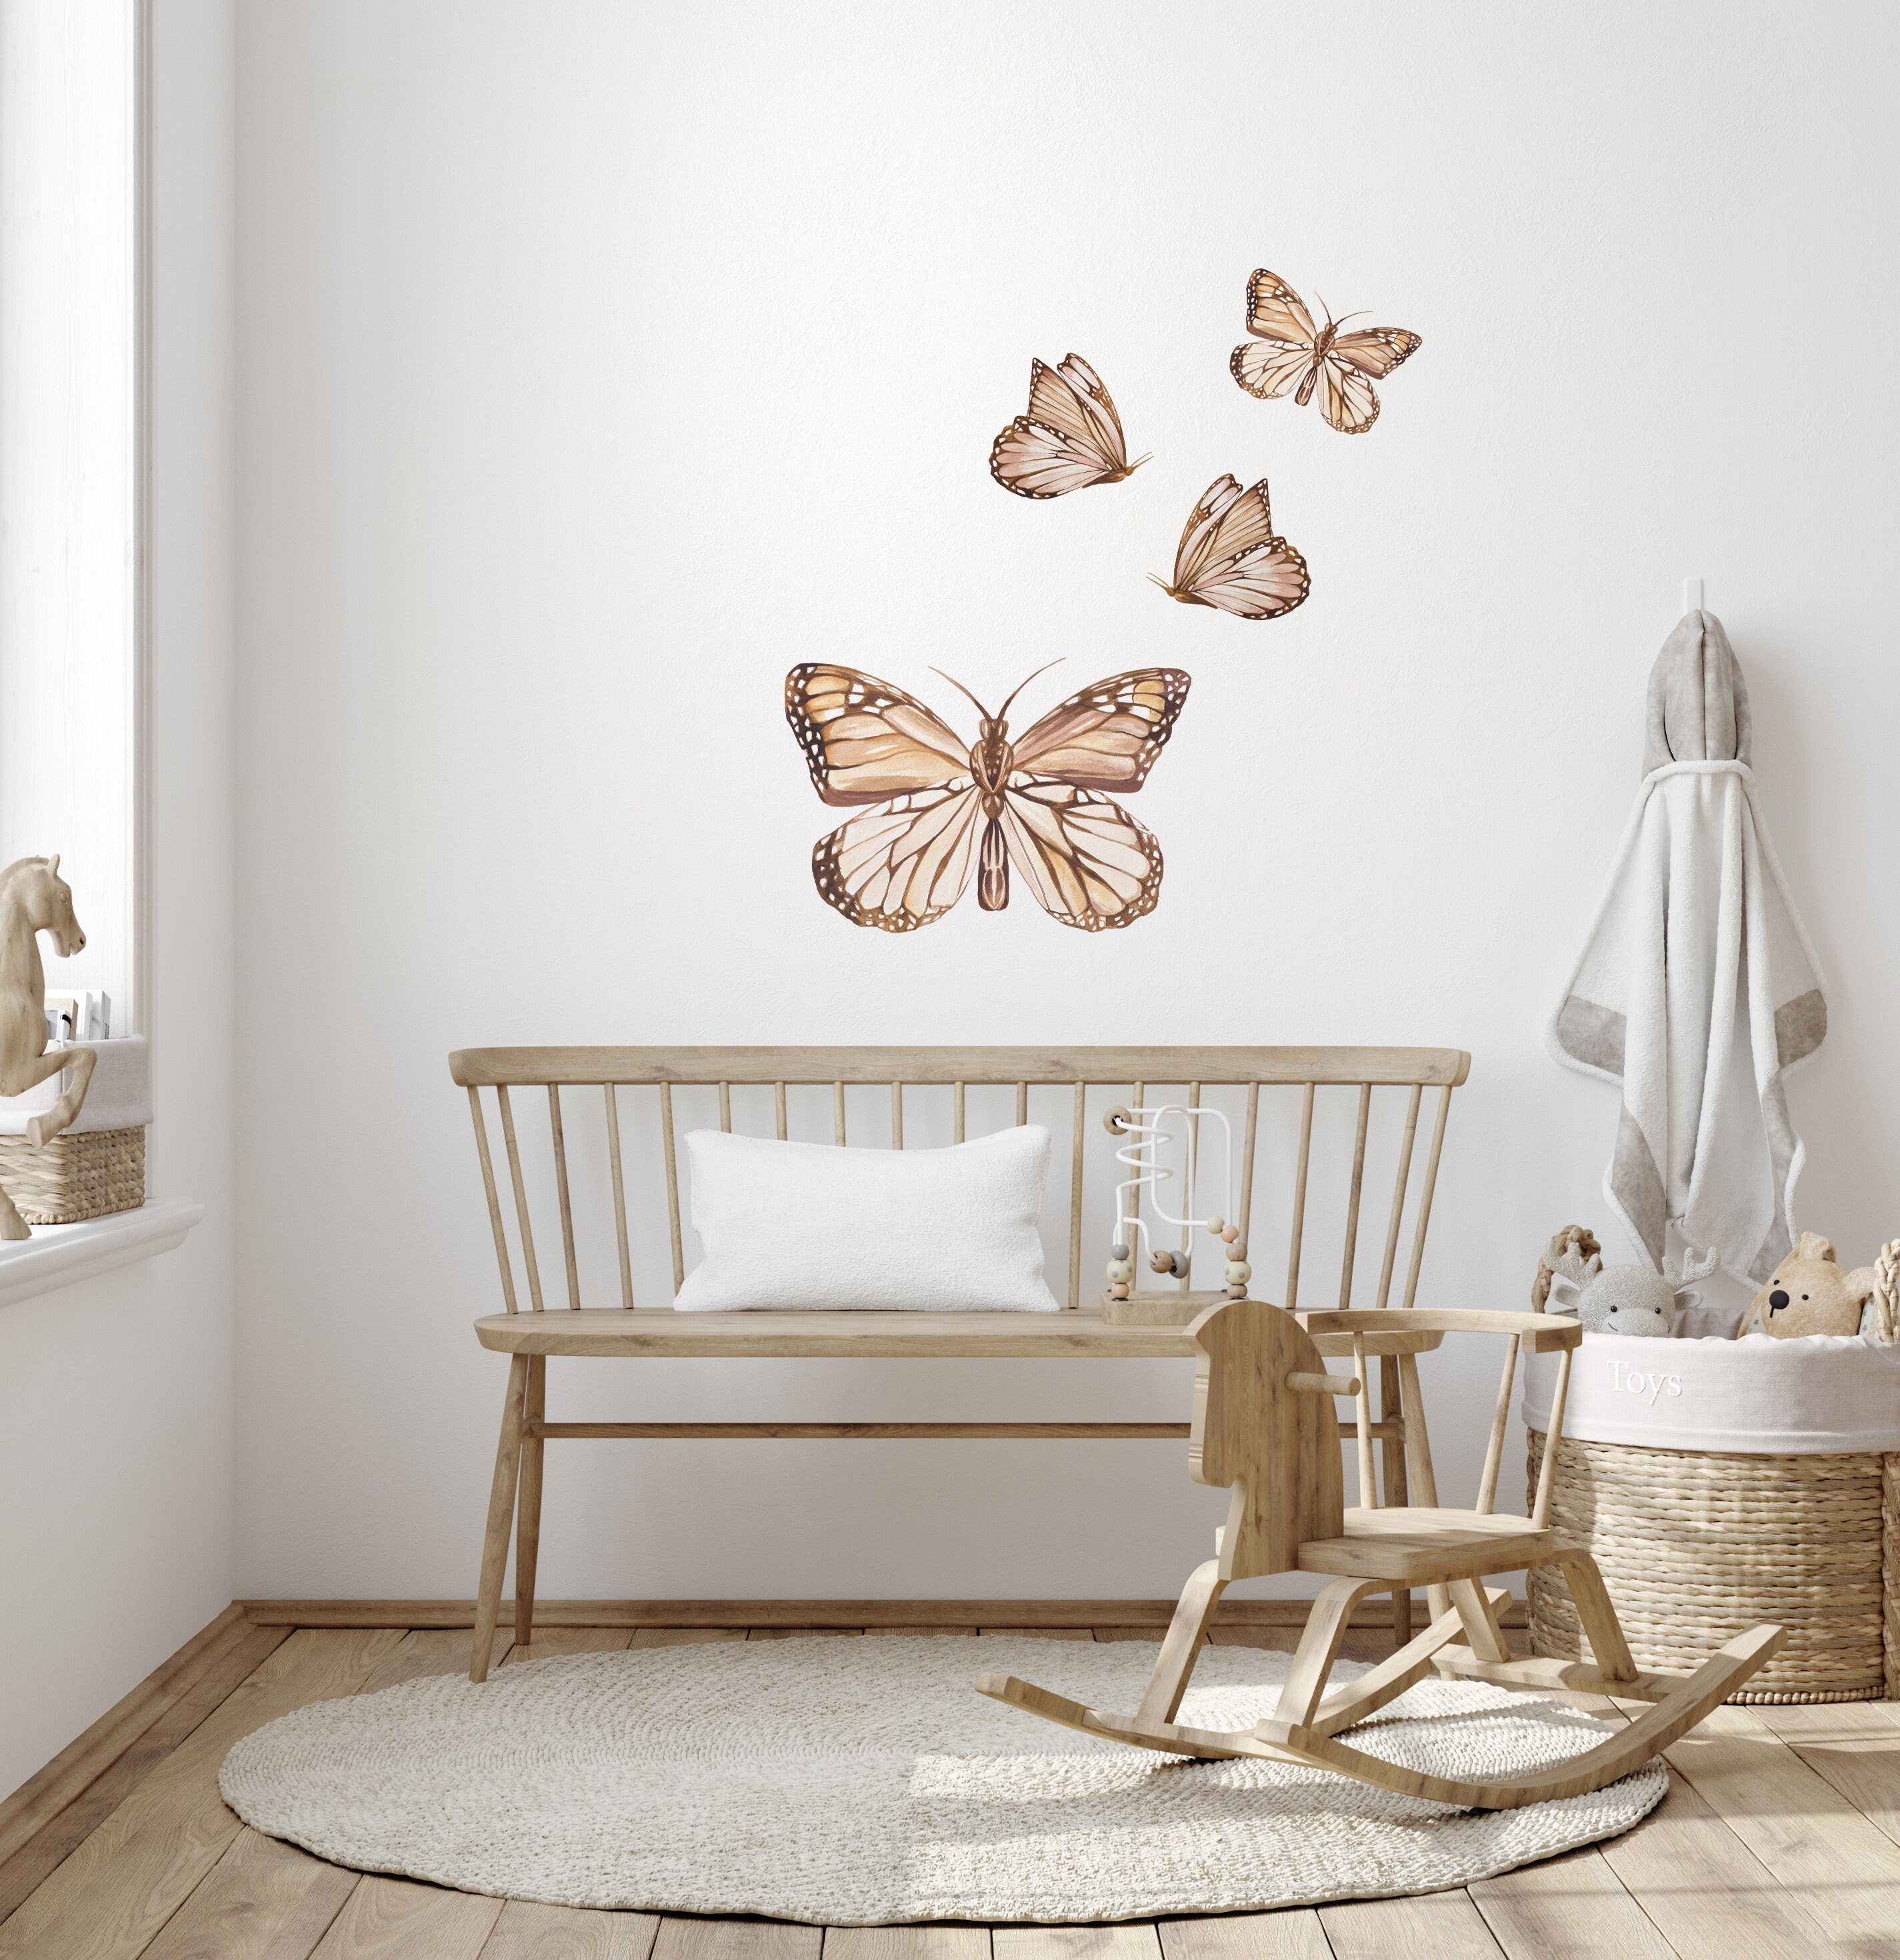 Rainbow Butterfly Wall Decals 72 Pieces